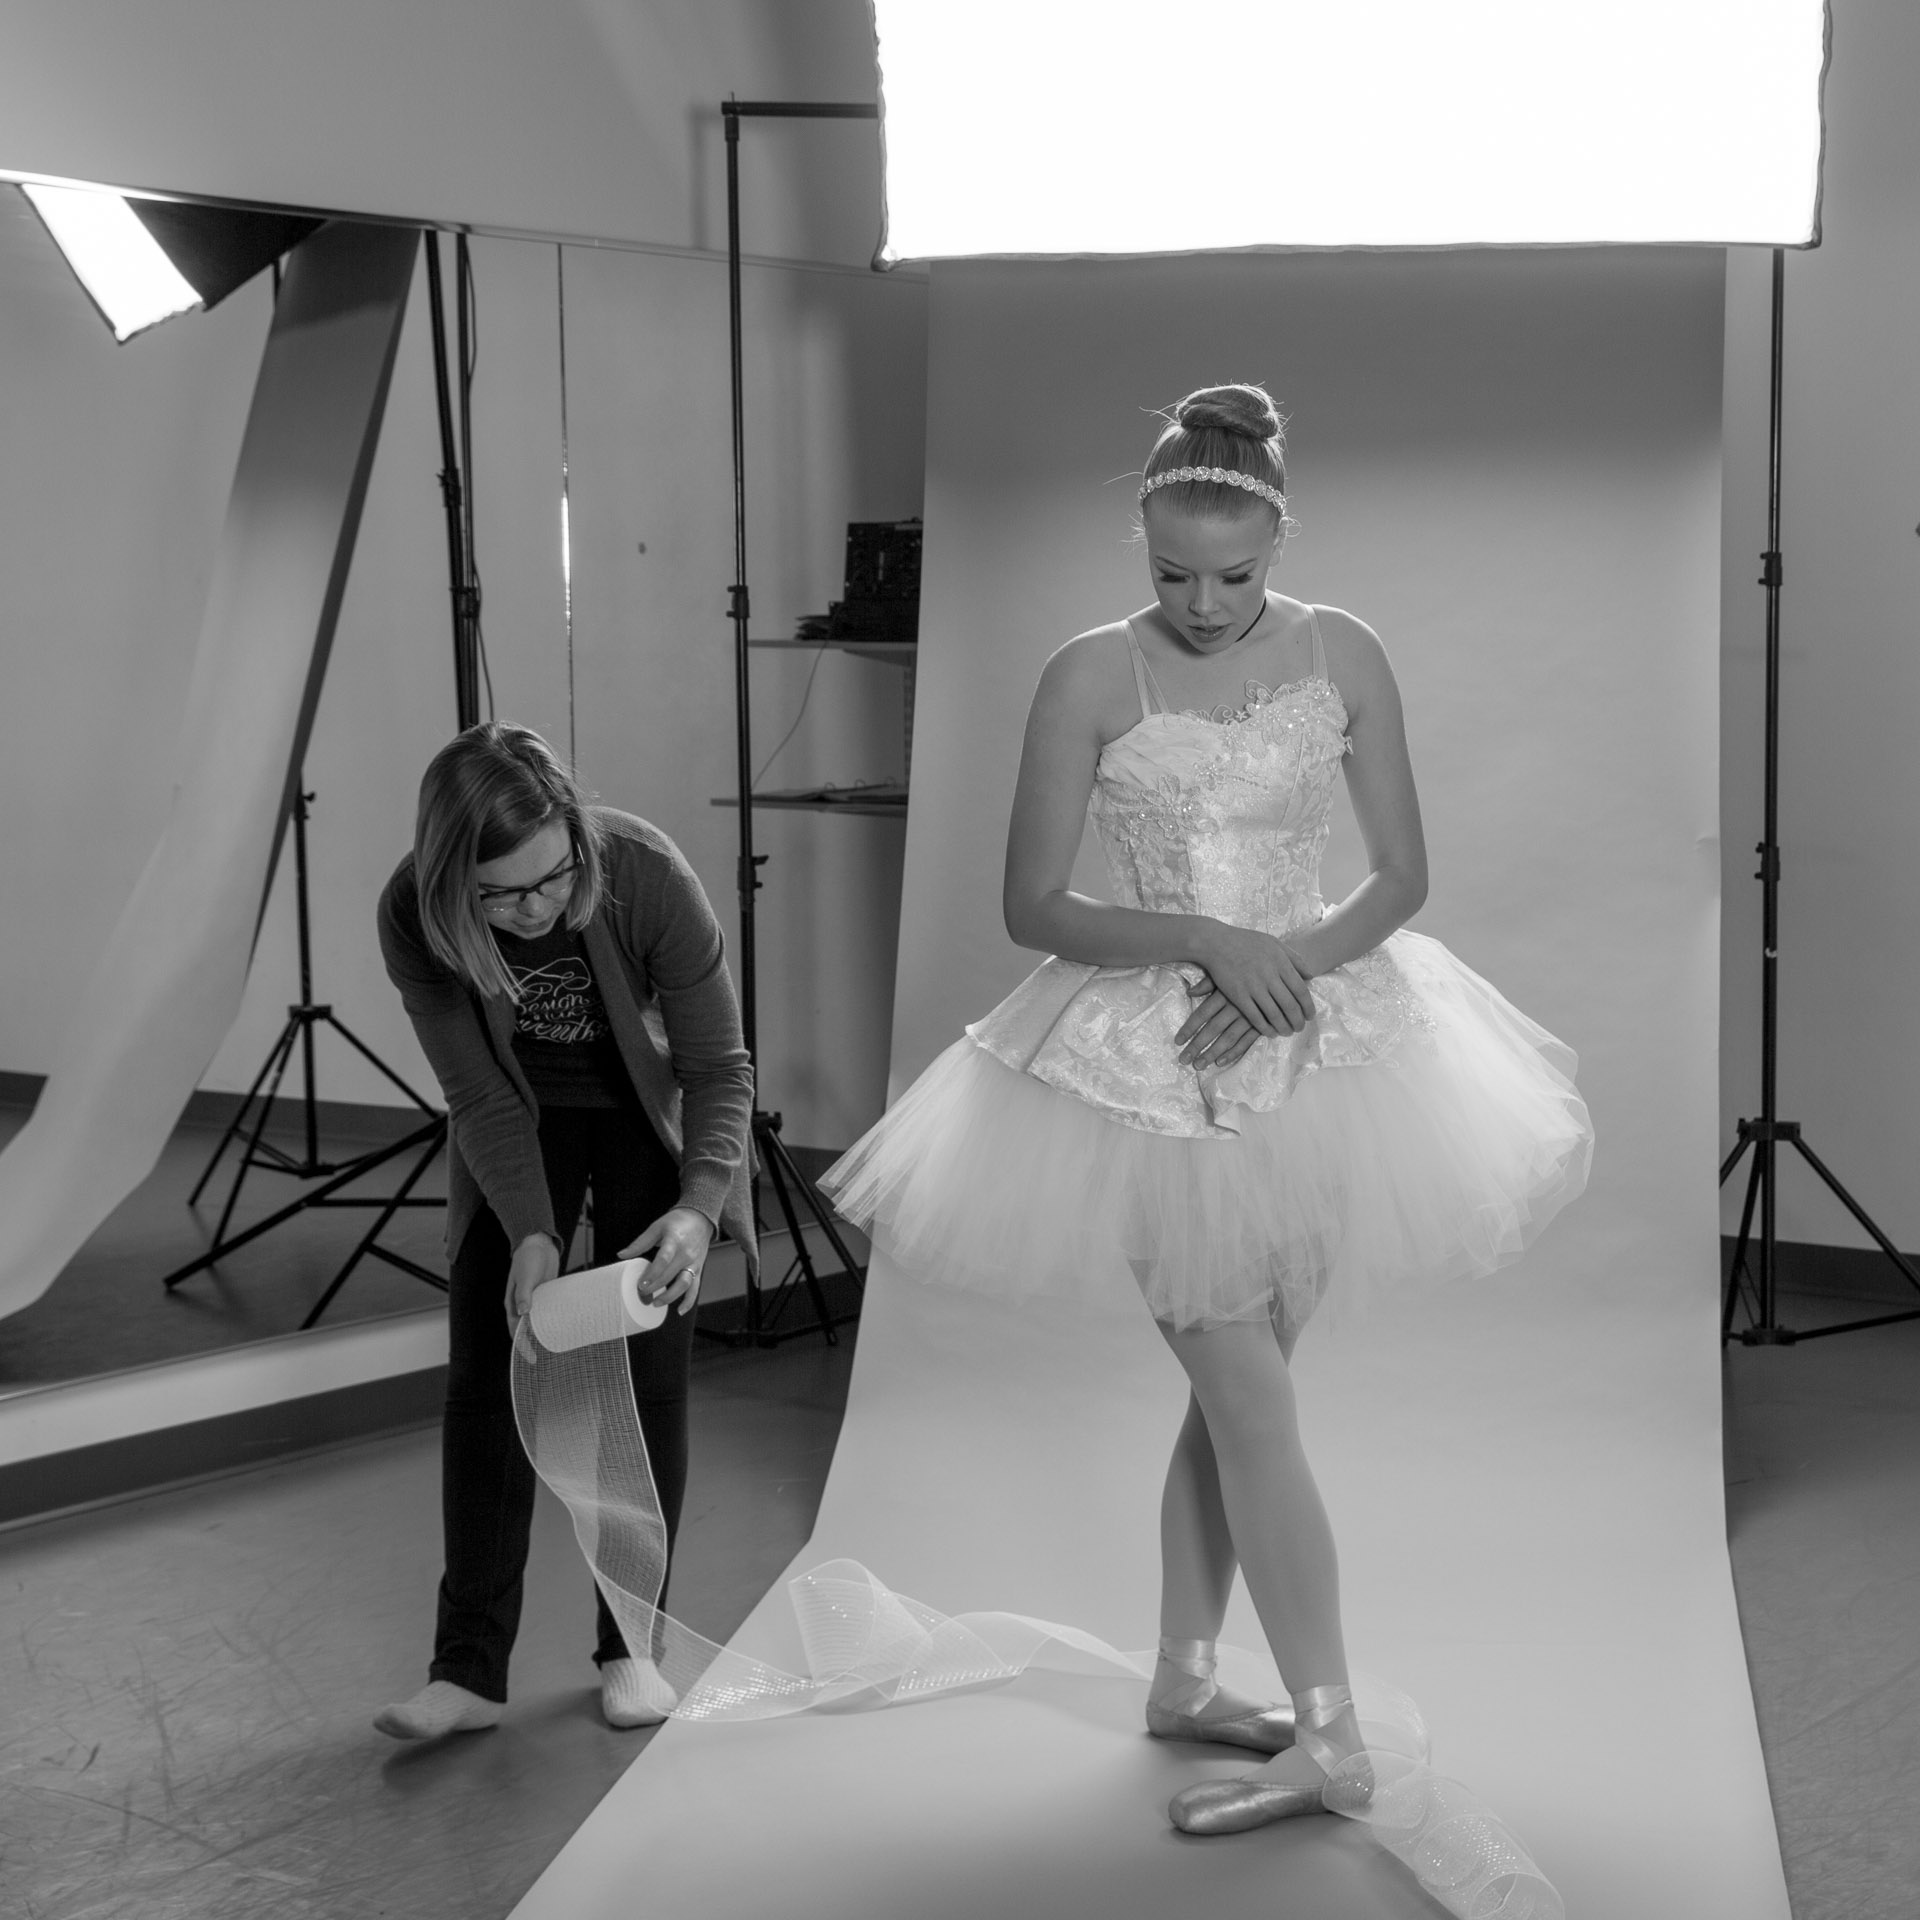 Woman draping tulle around the feet of ballerina dressed in Cinderella tutu in front of photo backdrop